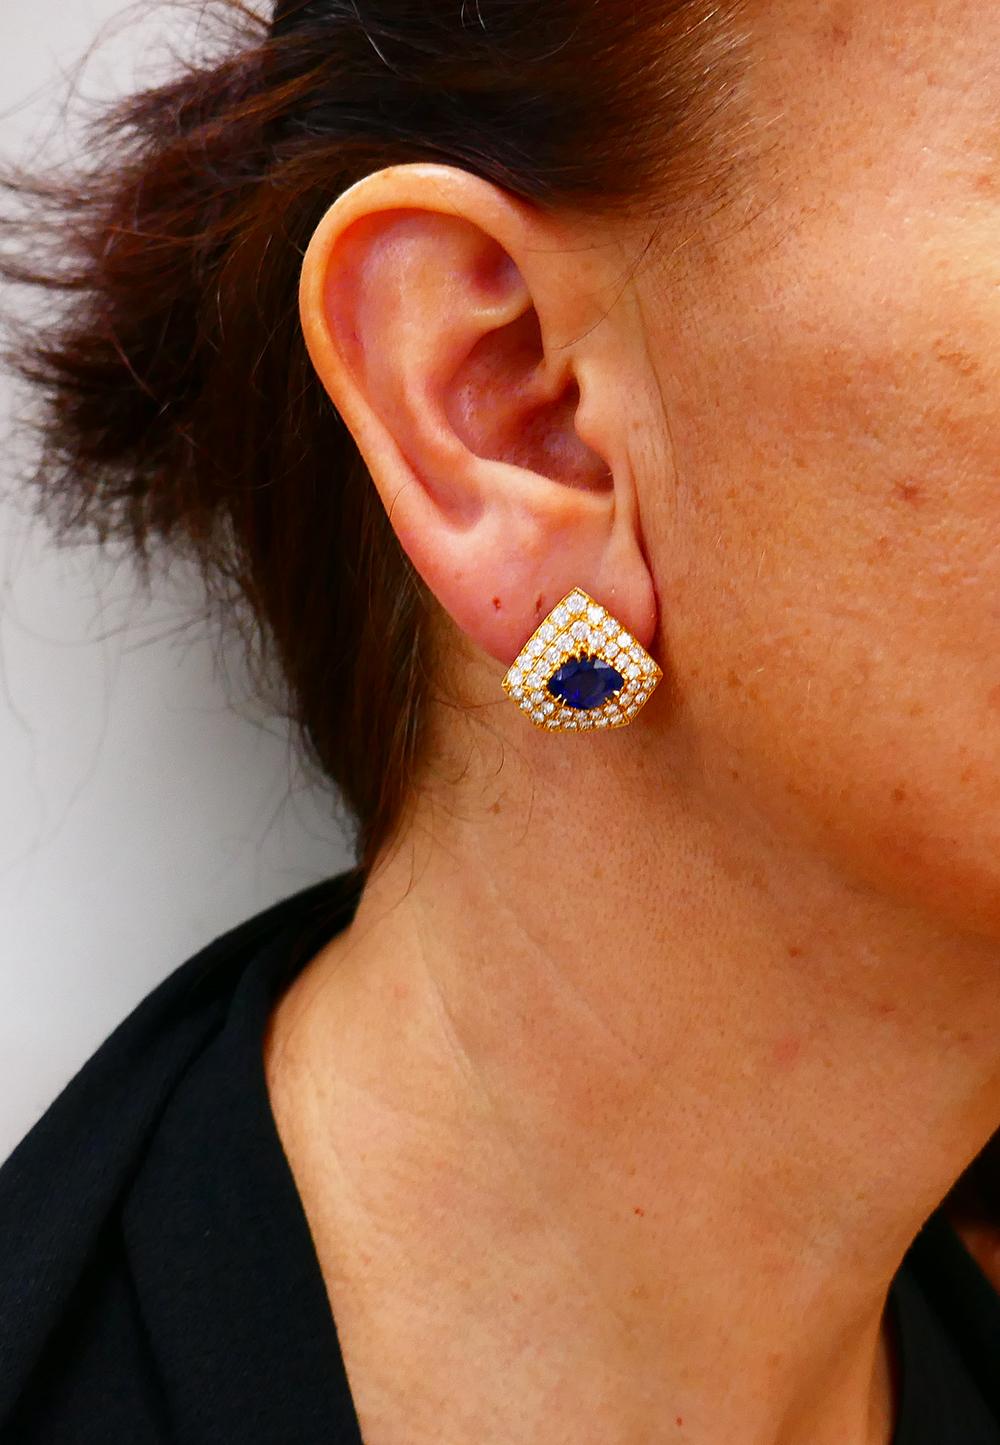 A pair of vintage French 18k gold earrings, featuring sapphire and diamond.
The earrings are made in an irregular pentagon shape. The diamonds are four-prong set in two rows around the perimeter. The marquise shaped sapphires are staged in the